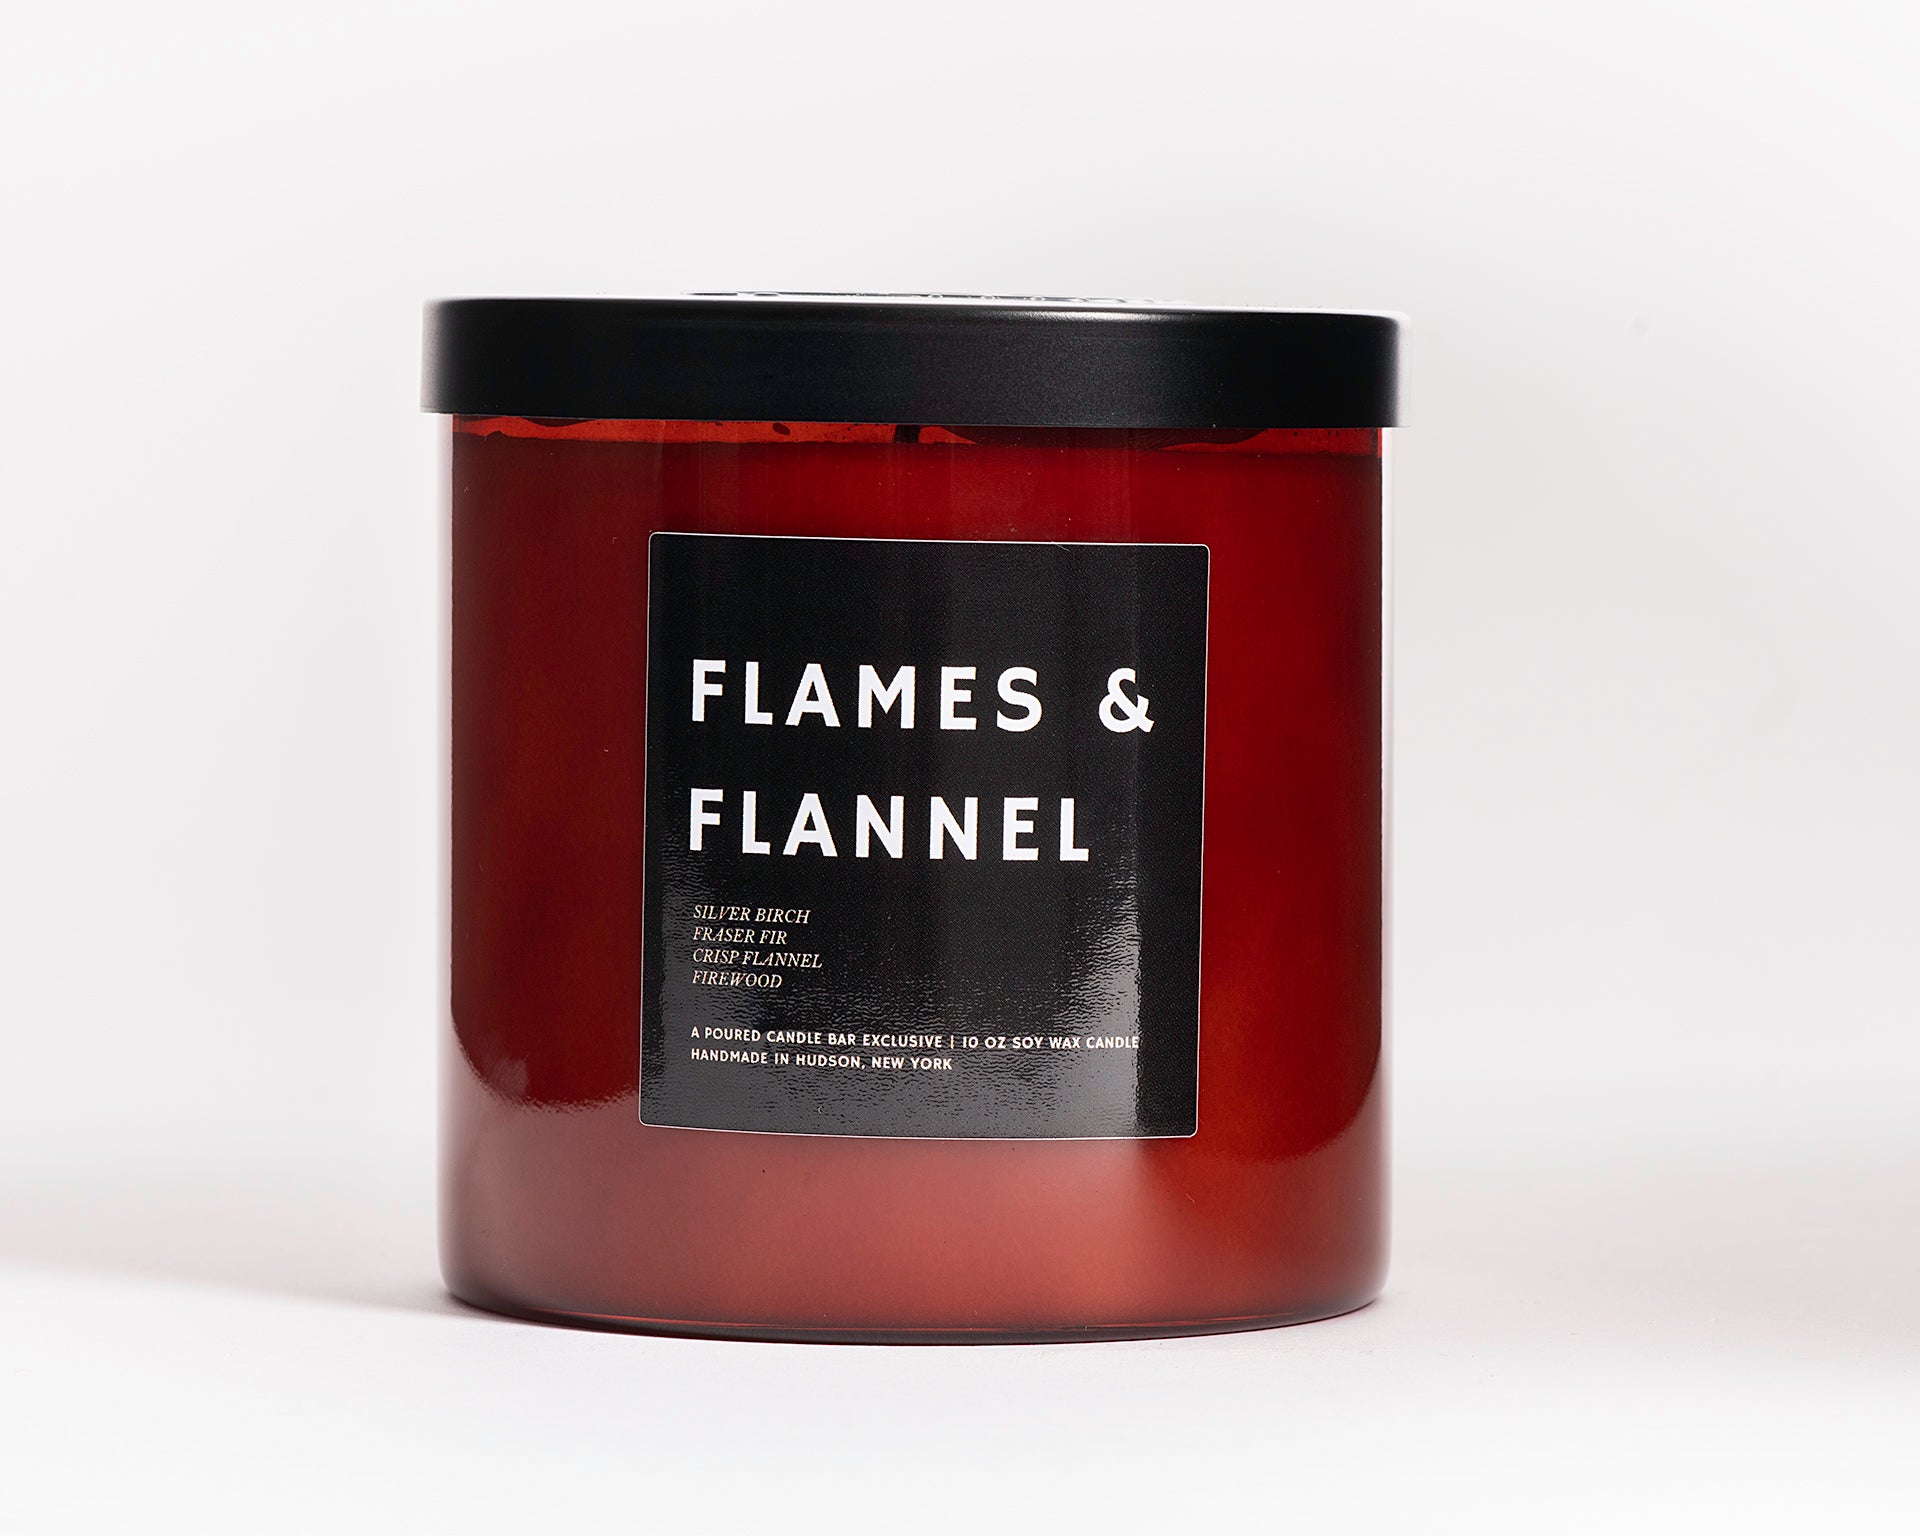 Flames & Flannel - Poured Candle Bar